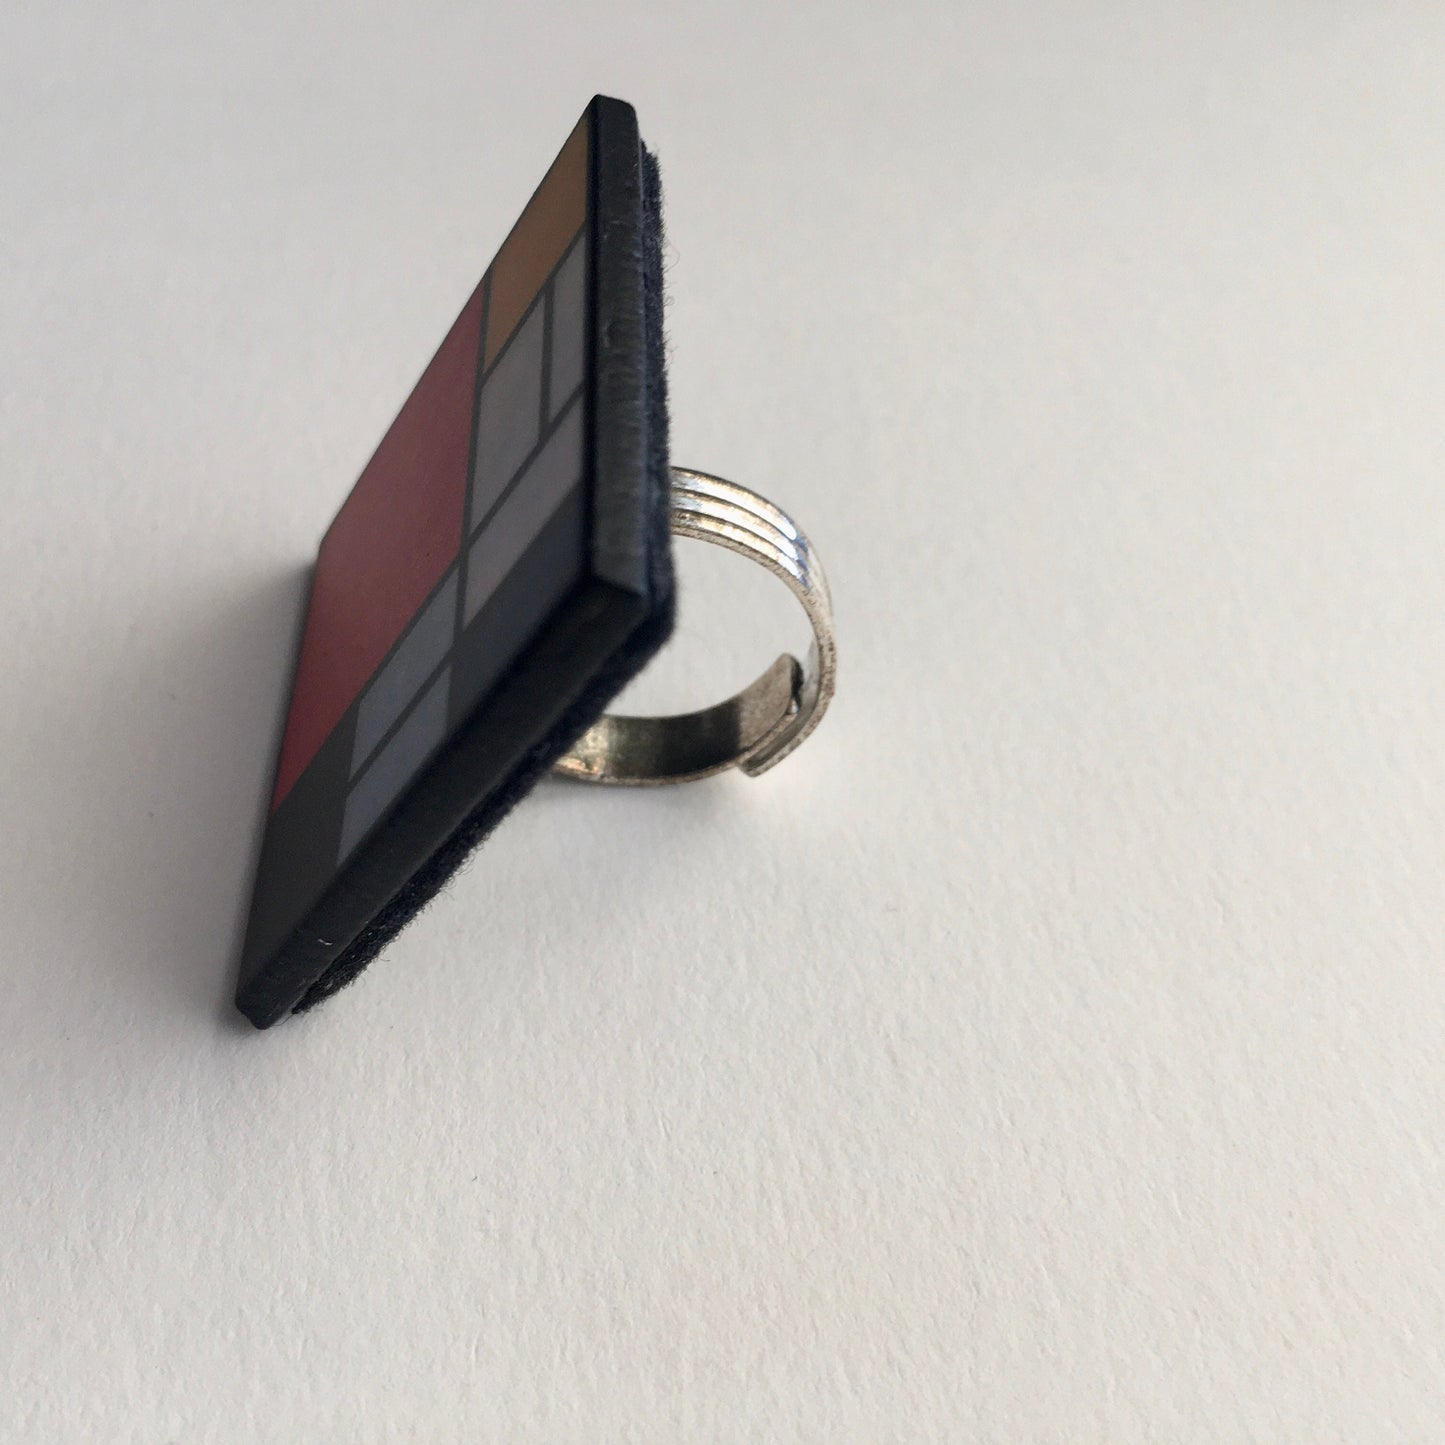 Wooden, 3.5 cm squared geometric art ring in red, blue, yellow and white colors. Obljewellery shop is inspired by Mondrian's De Stijl period works.